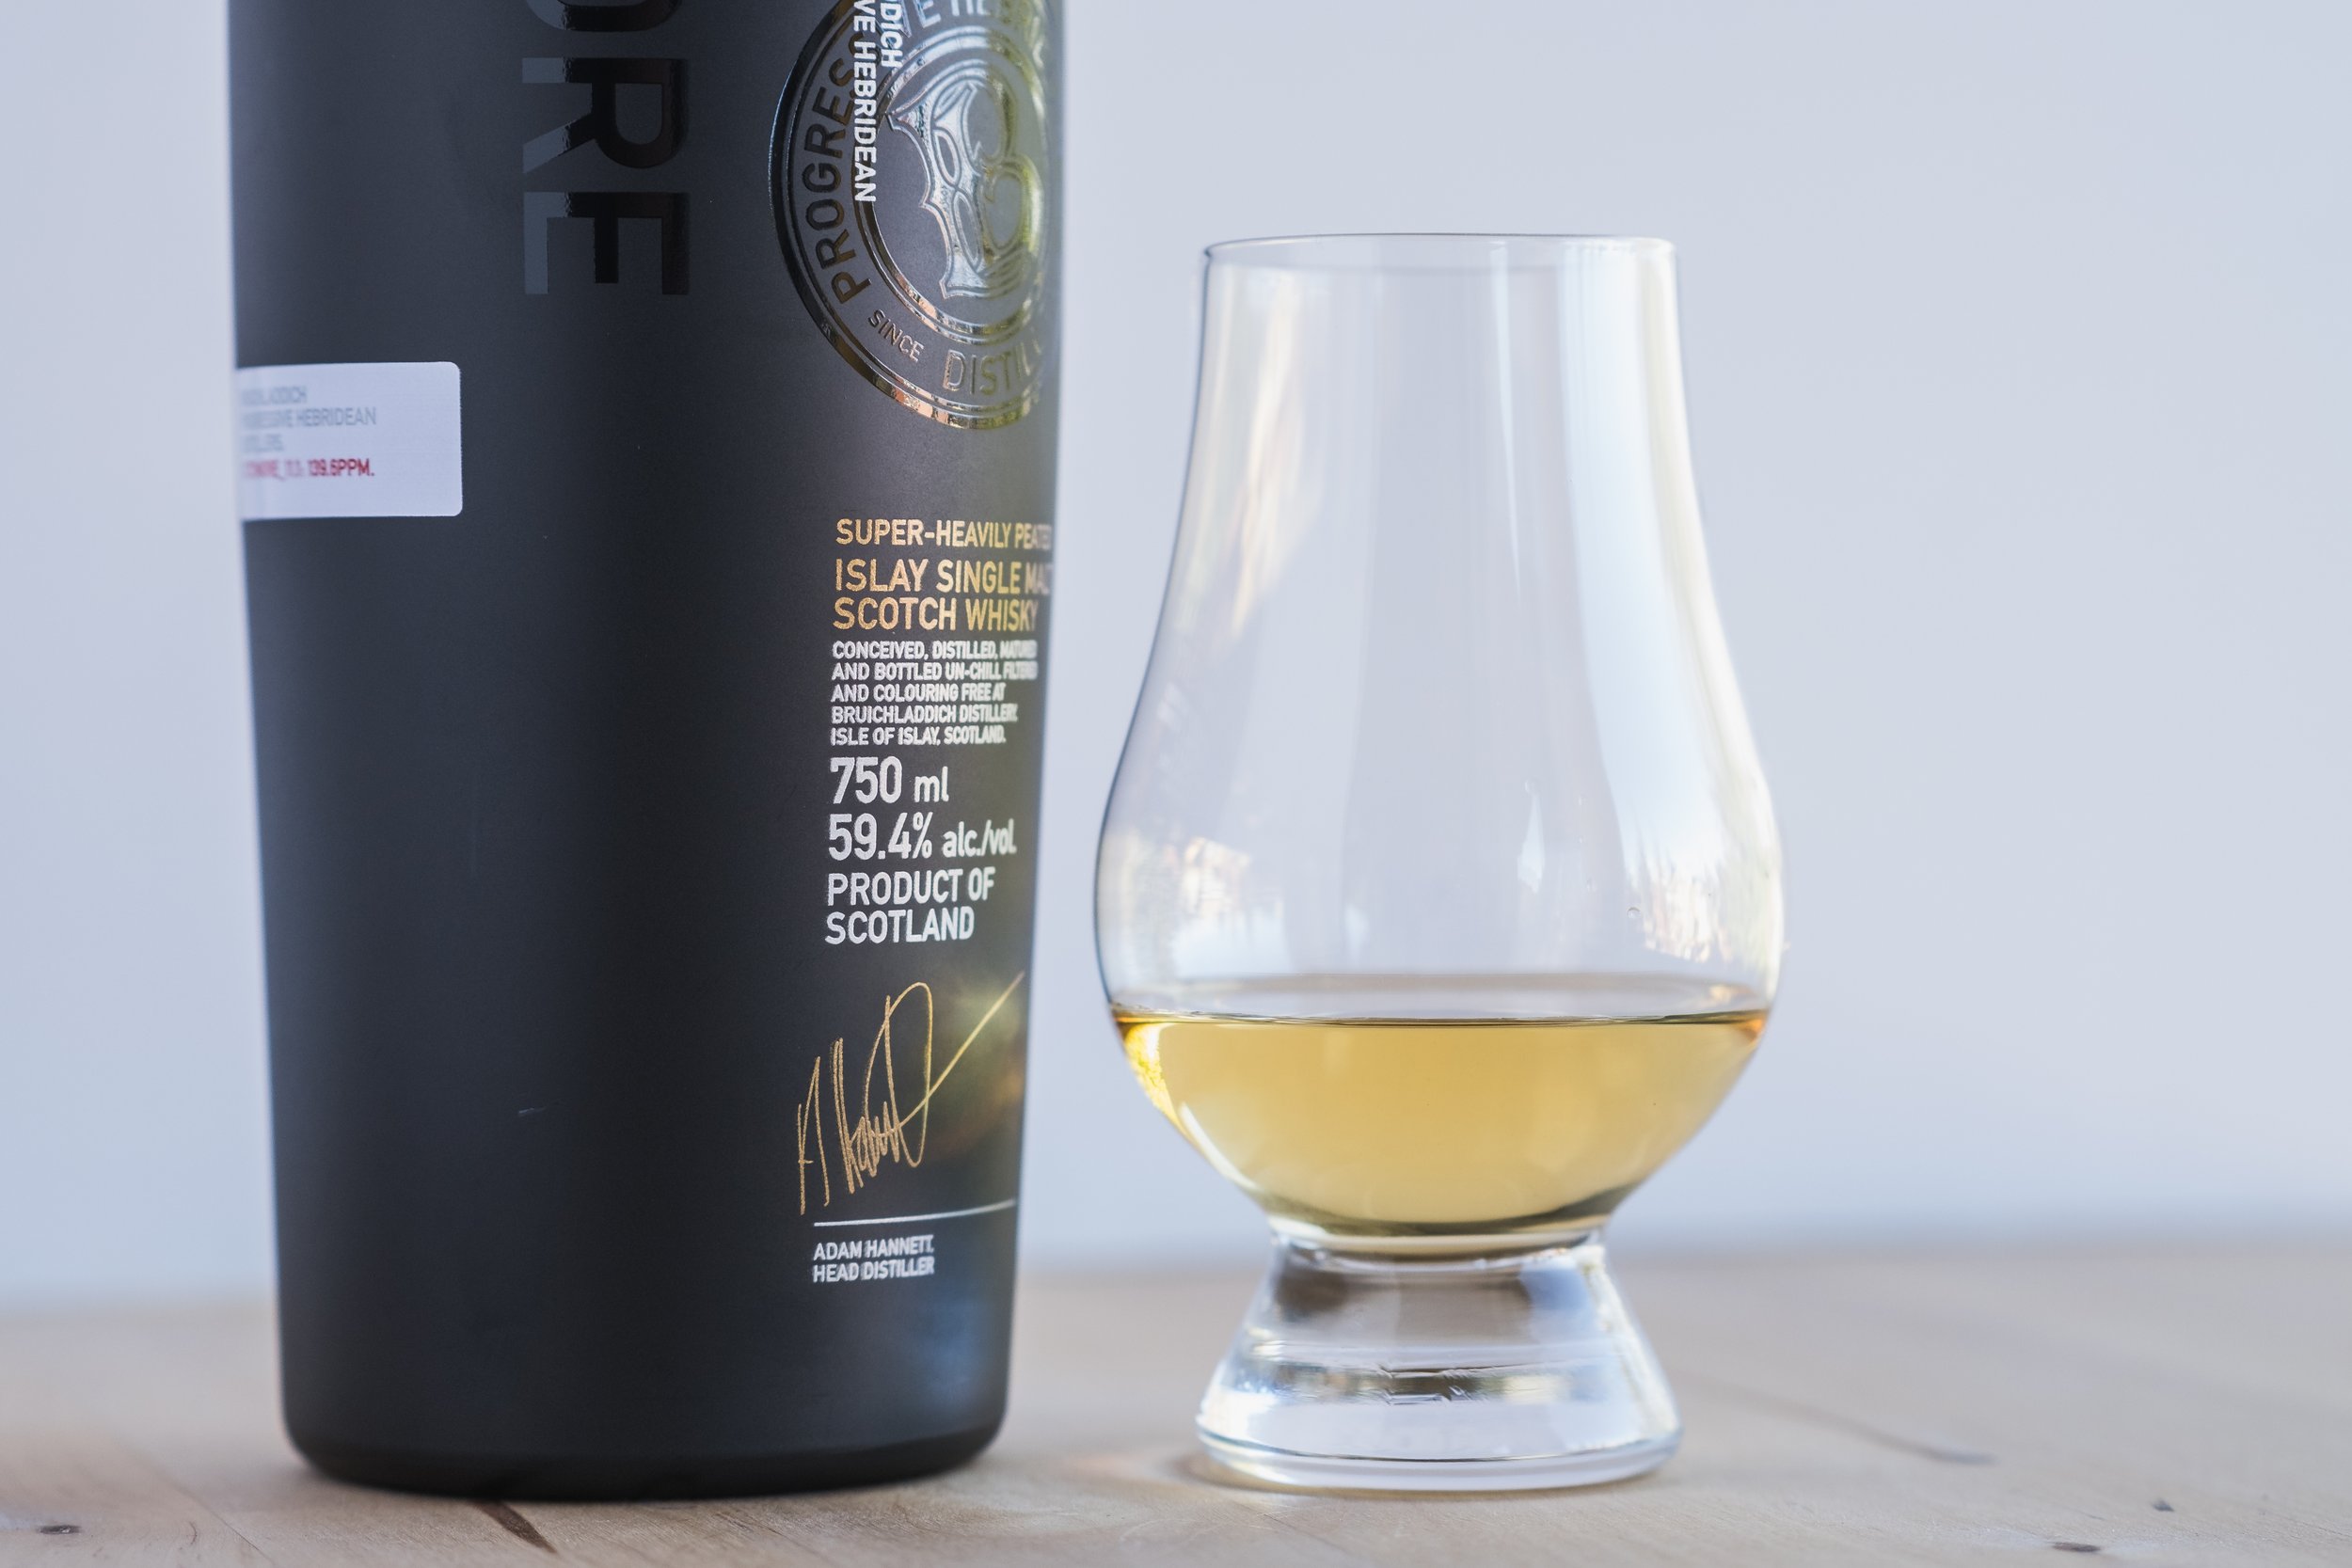 Octomore 11.1_with dram_01.jpg